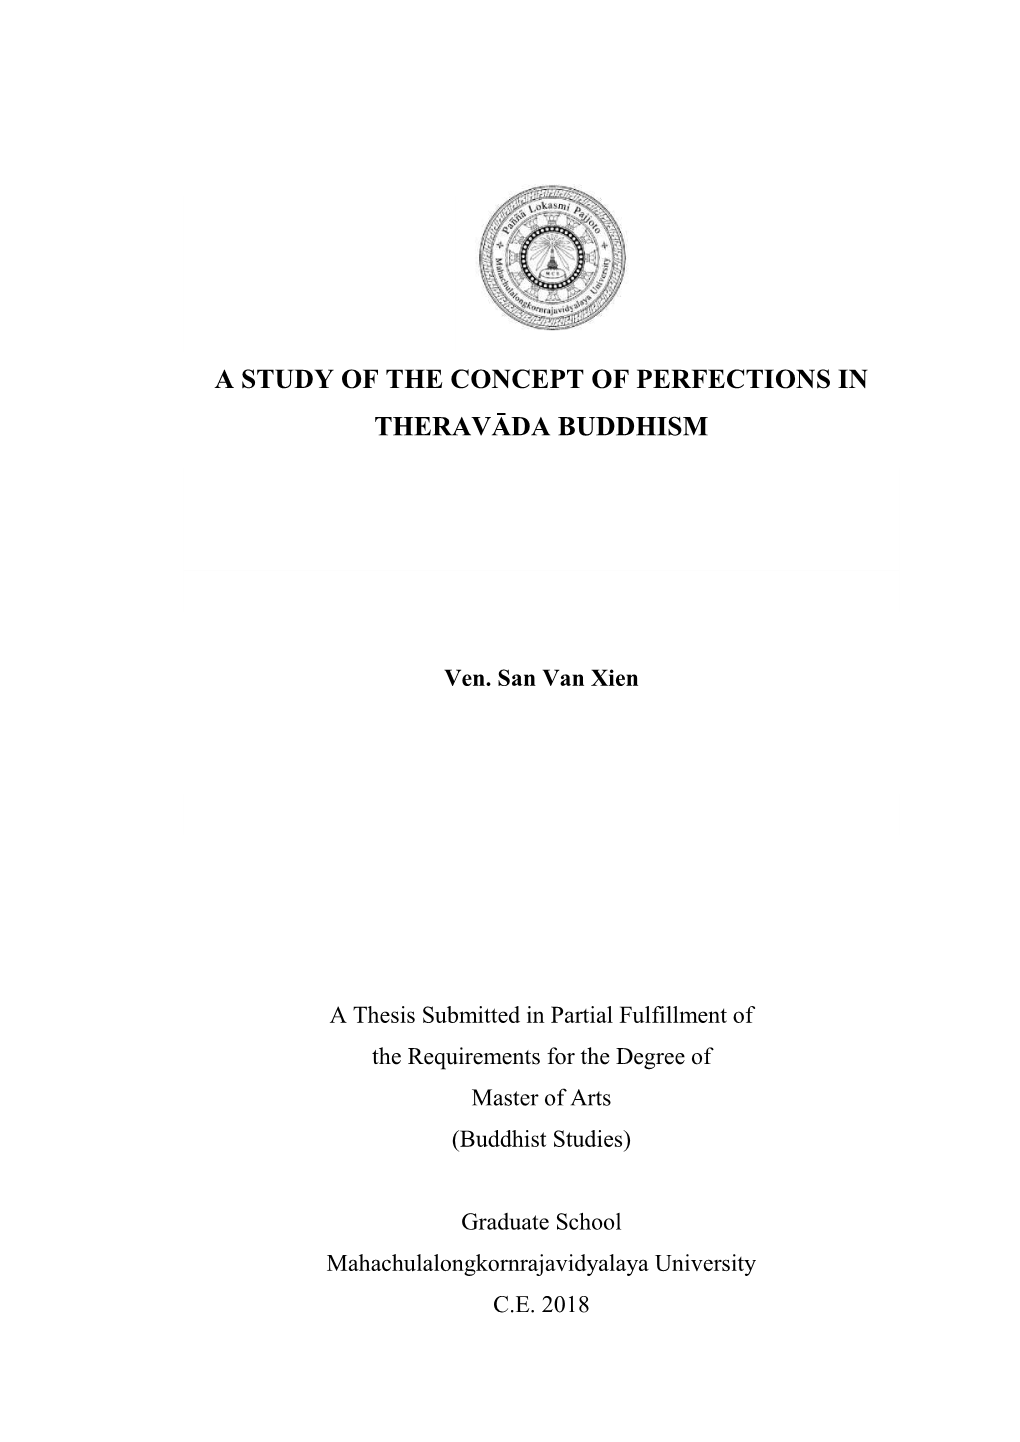 A Study of the Concept of Perfections in Theravāda Buddhism